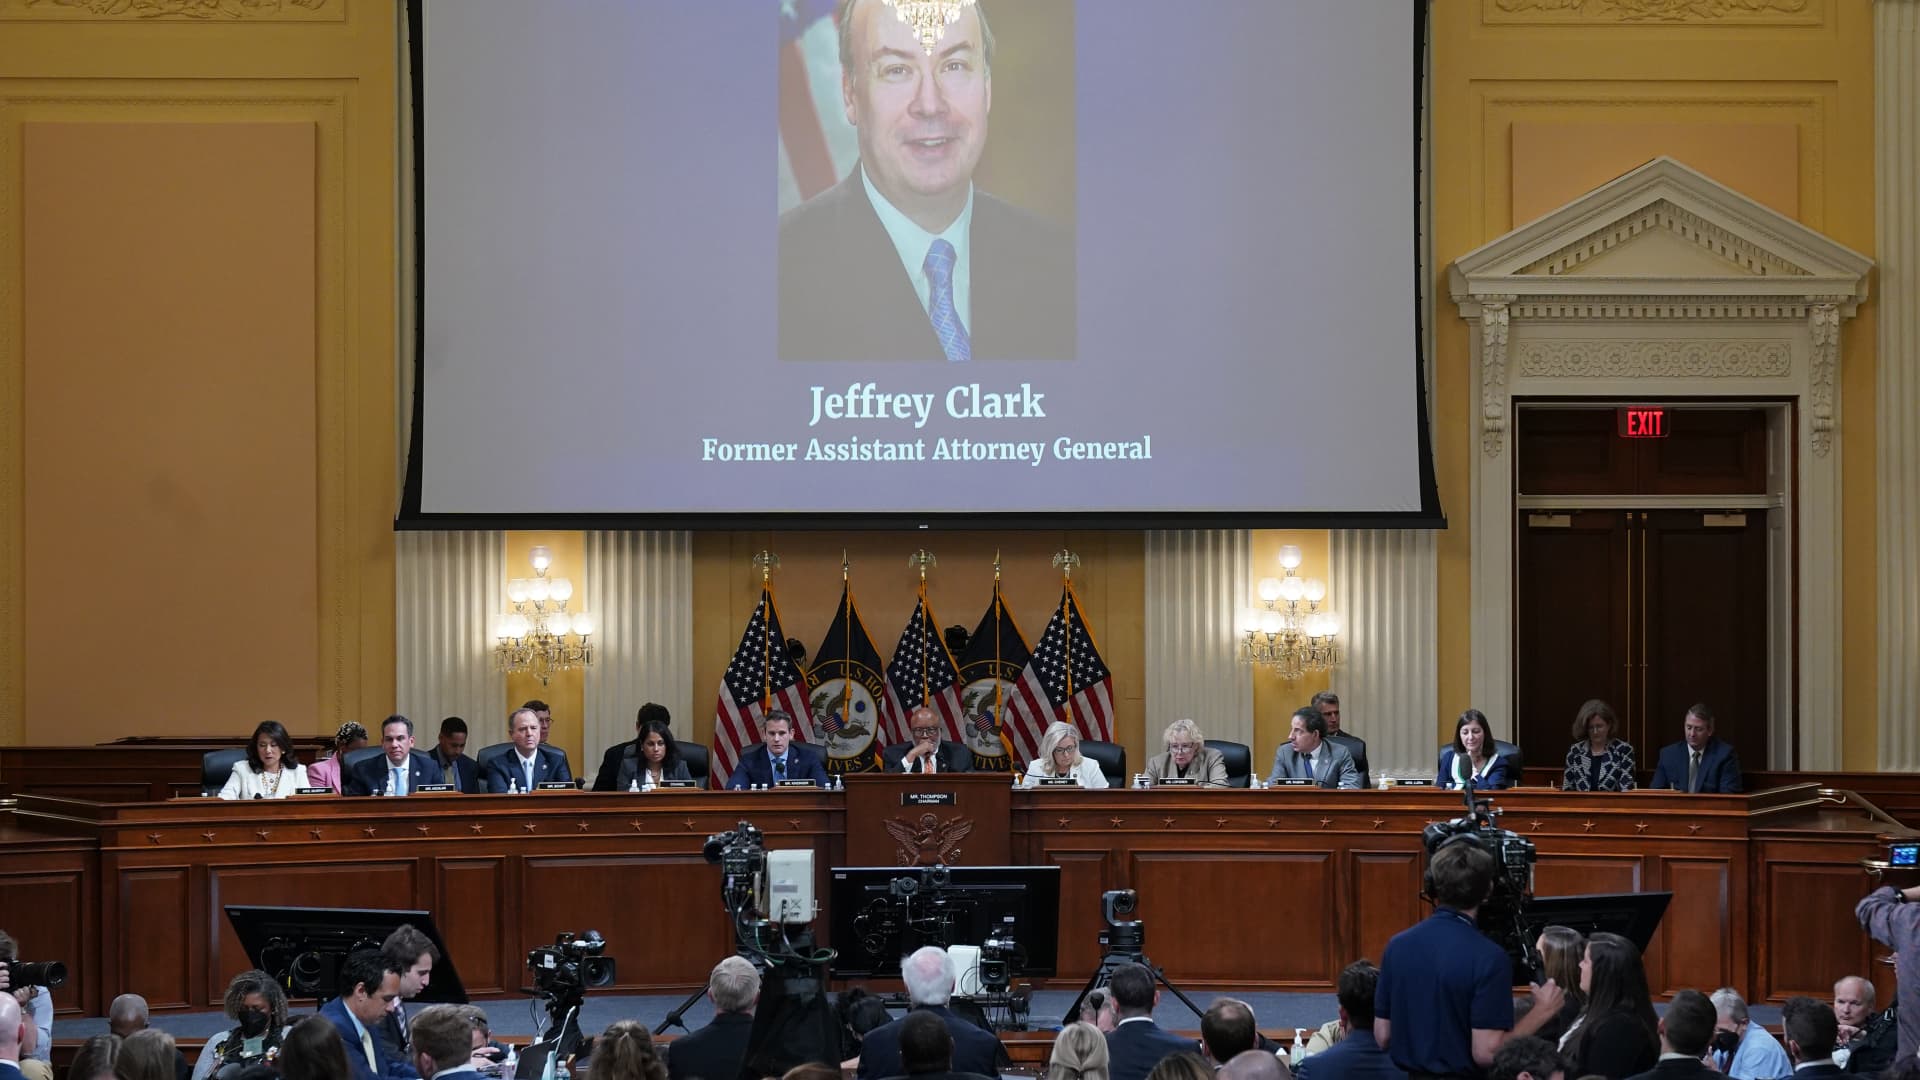 An image of former Assistant Attorney General Jeffrey Clark appears on a screen during the fifth hearing held by the Select Committee to Investigate the January 6th Attack on the U.S. Capitol on June 23, 2022 in the Cannon House Office Building in Washington, DC.